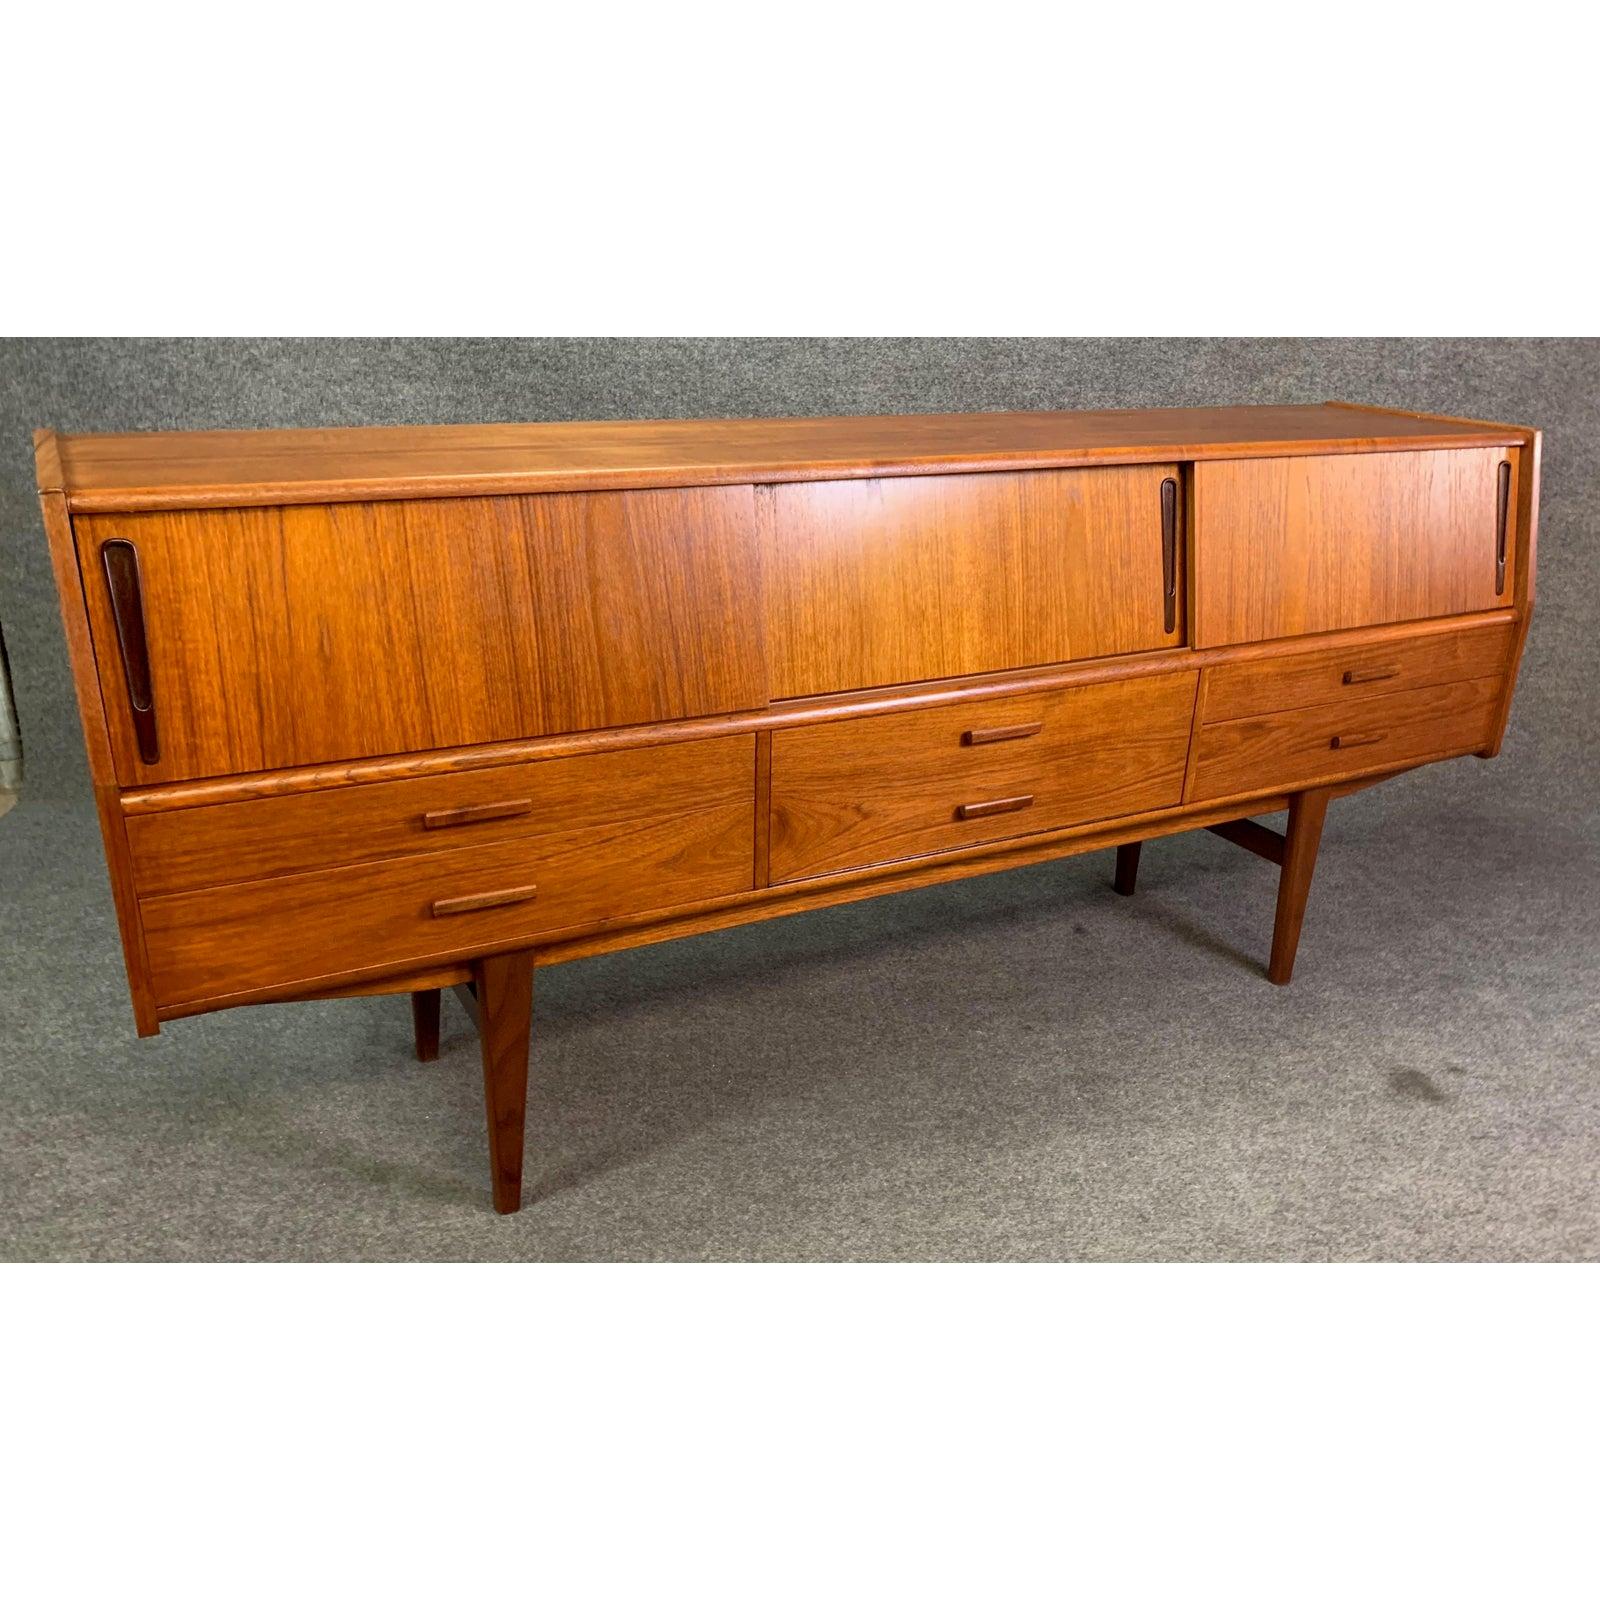 Here is an exclusive Scandinavian Modern sideboard in teak wood recently imported from Copenhagen to California before its restoration.
This special case good, with its vibrant wood grain, features an angle front, three sliding doors with storage